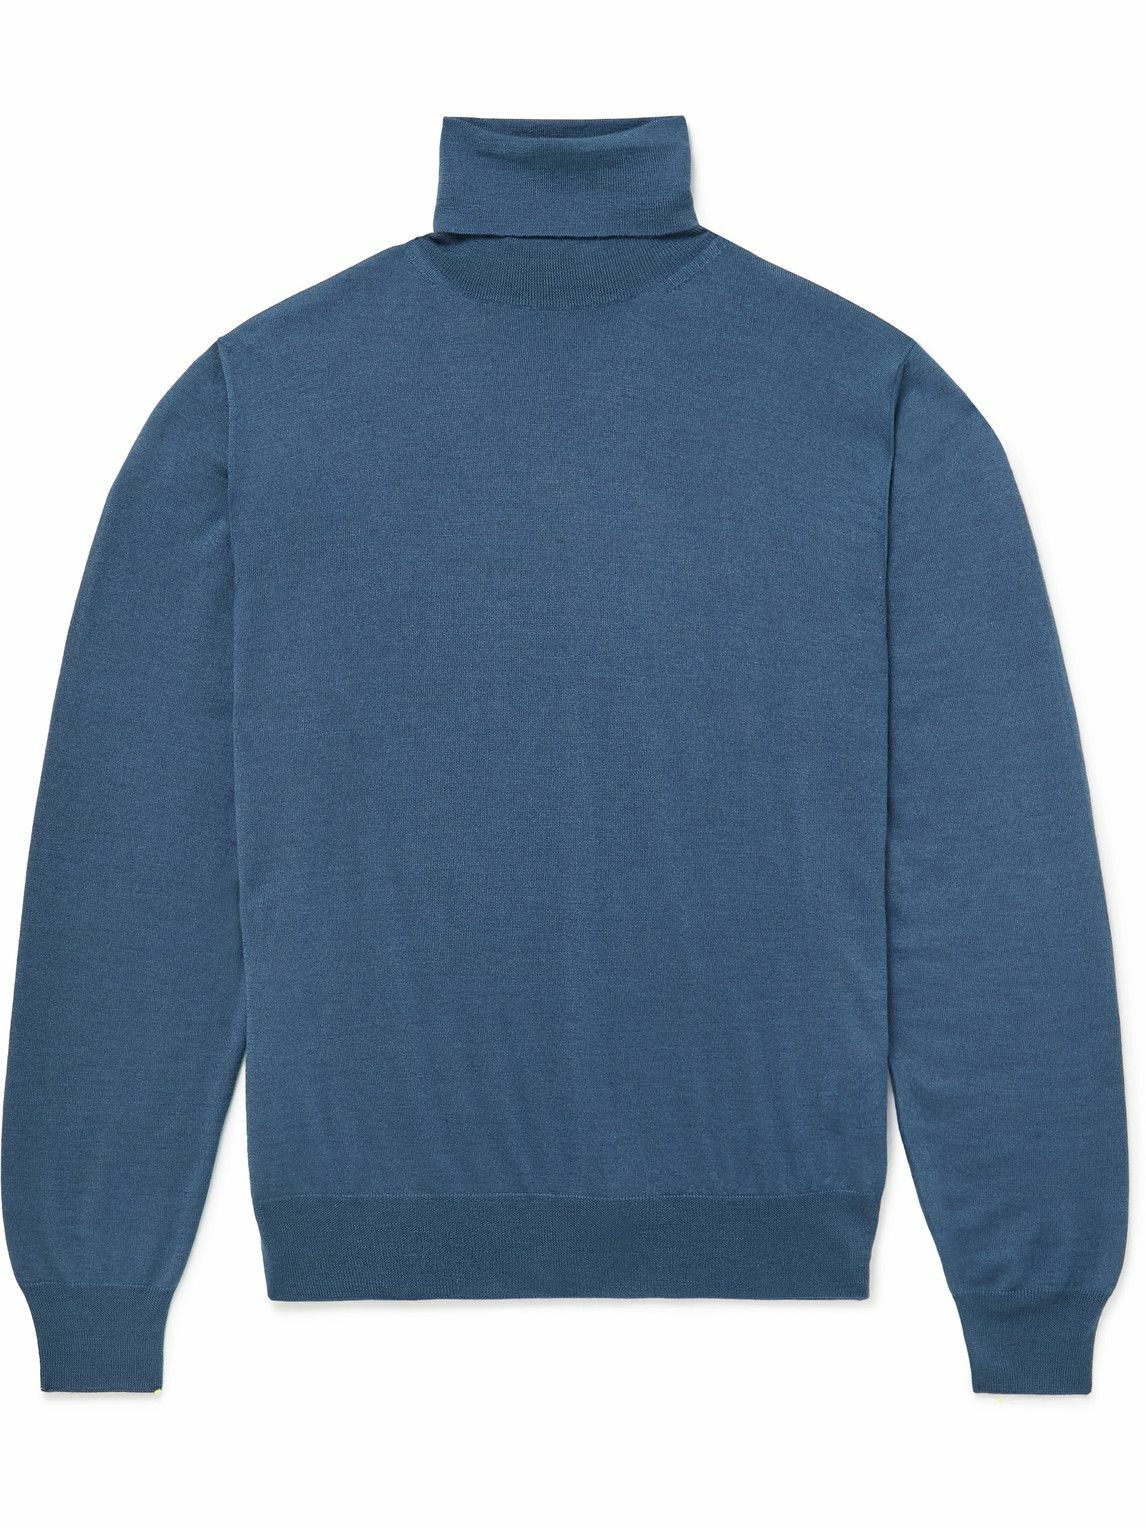 Canali - Cashmere, Wool and Silk-Blend Rollneck Sweater - Blue Canali